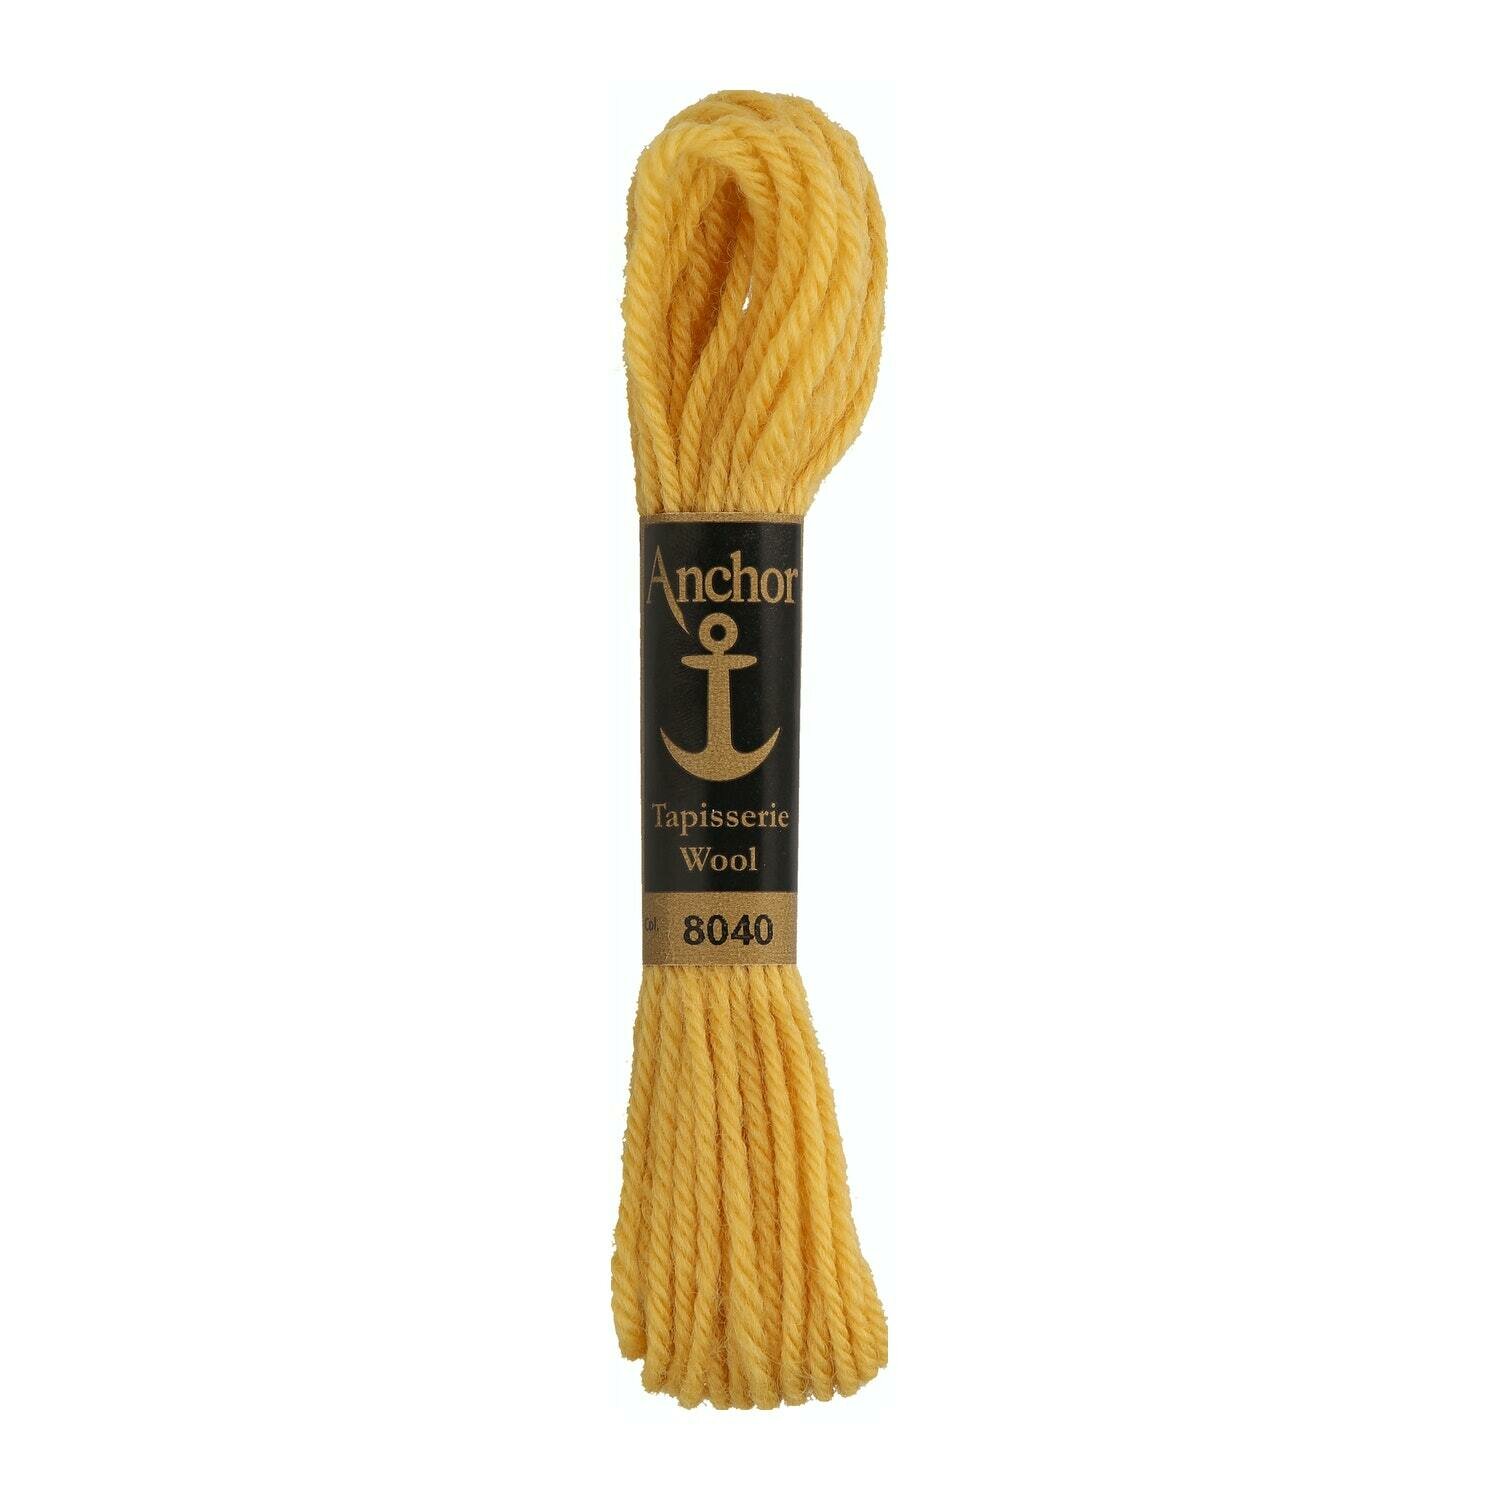 Anchor Tapisserie Wool #  08040